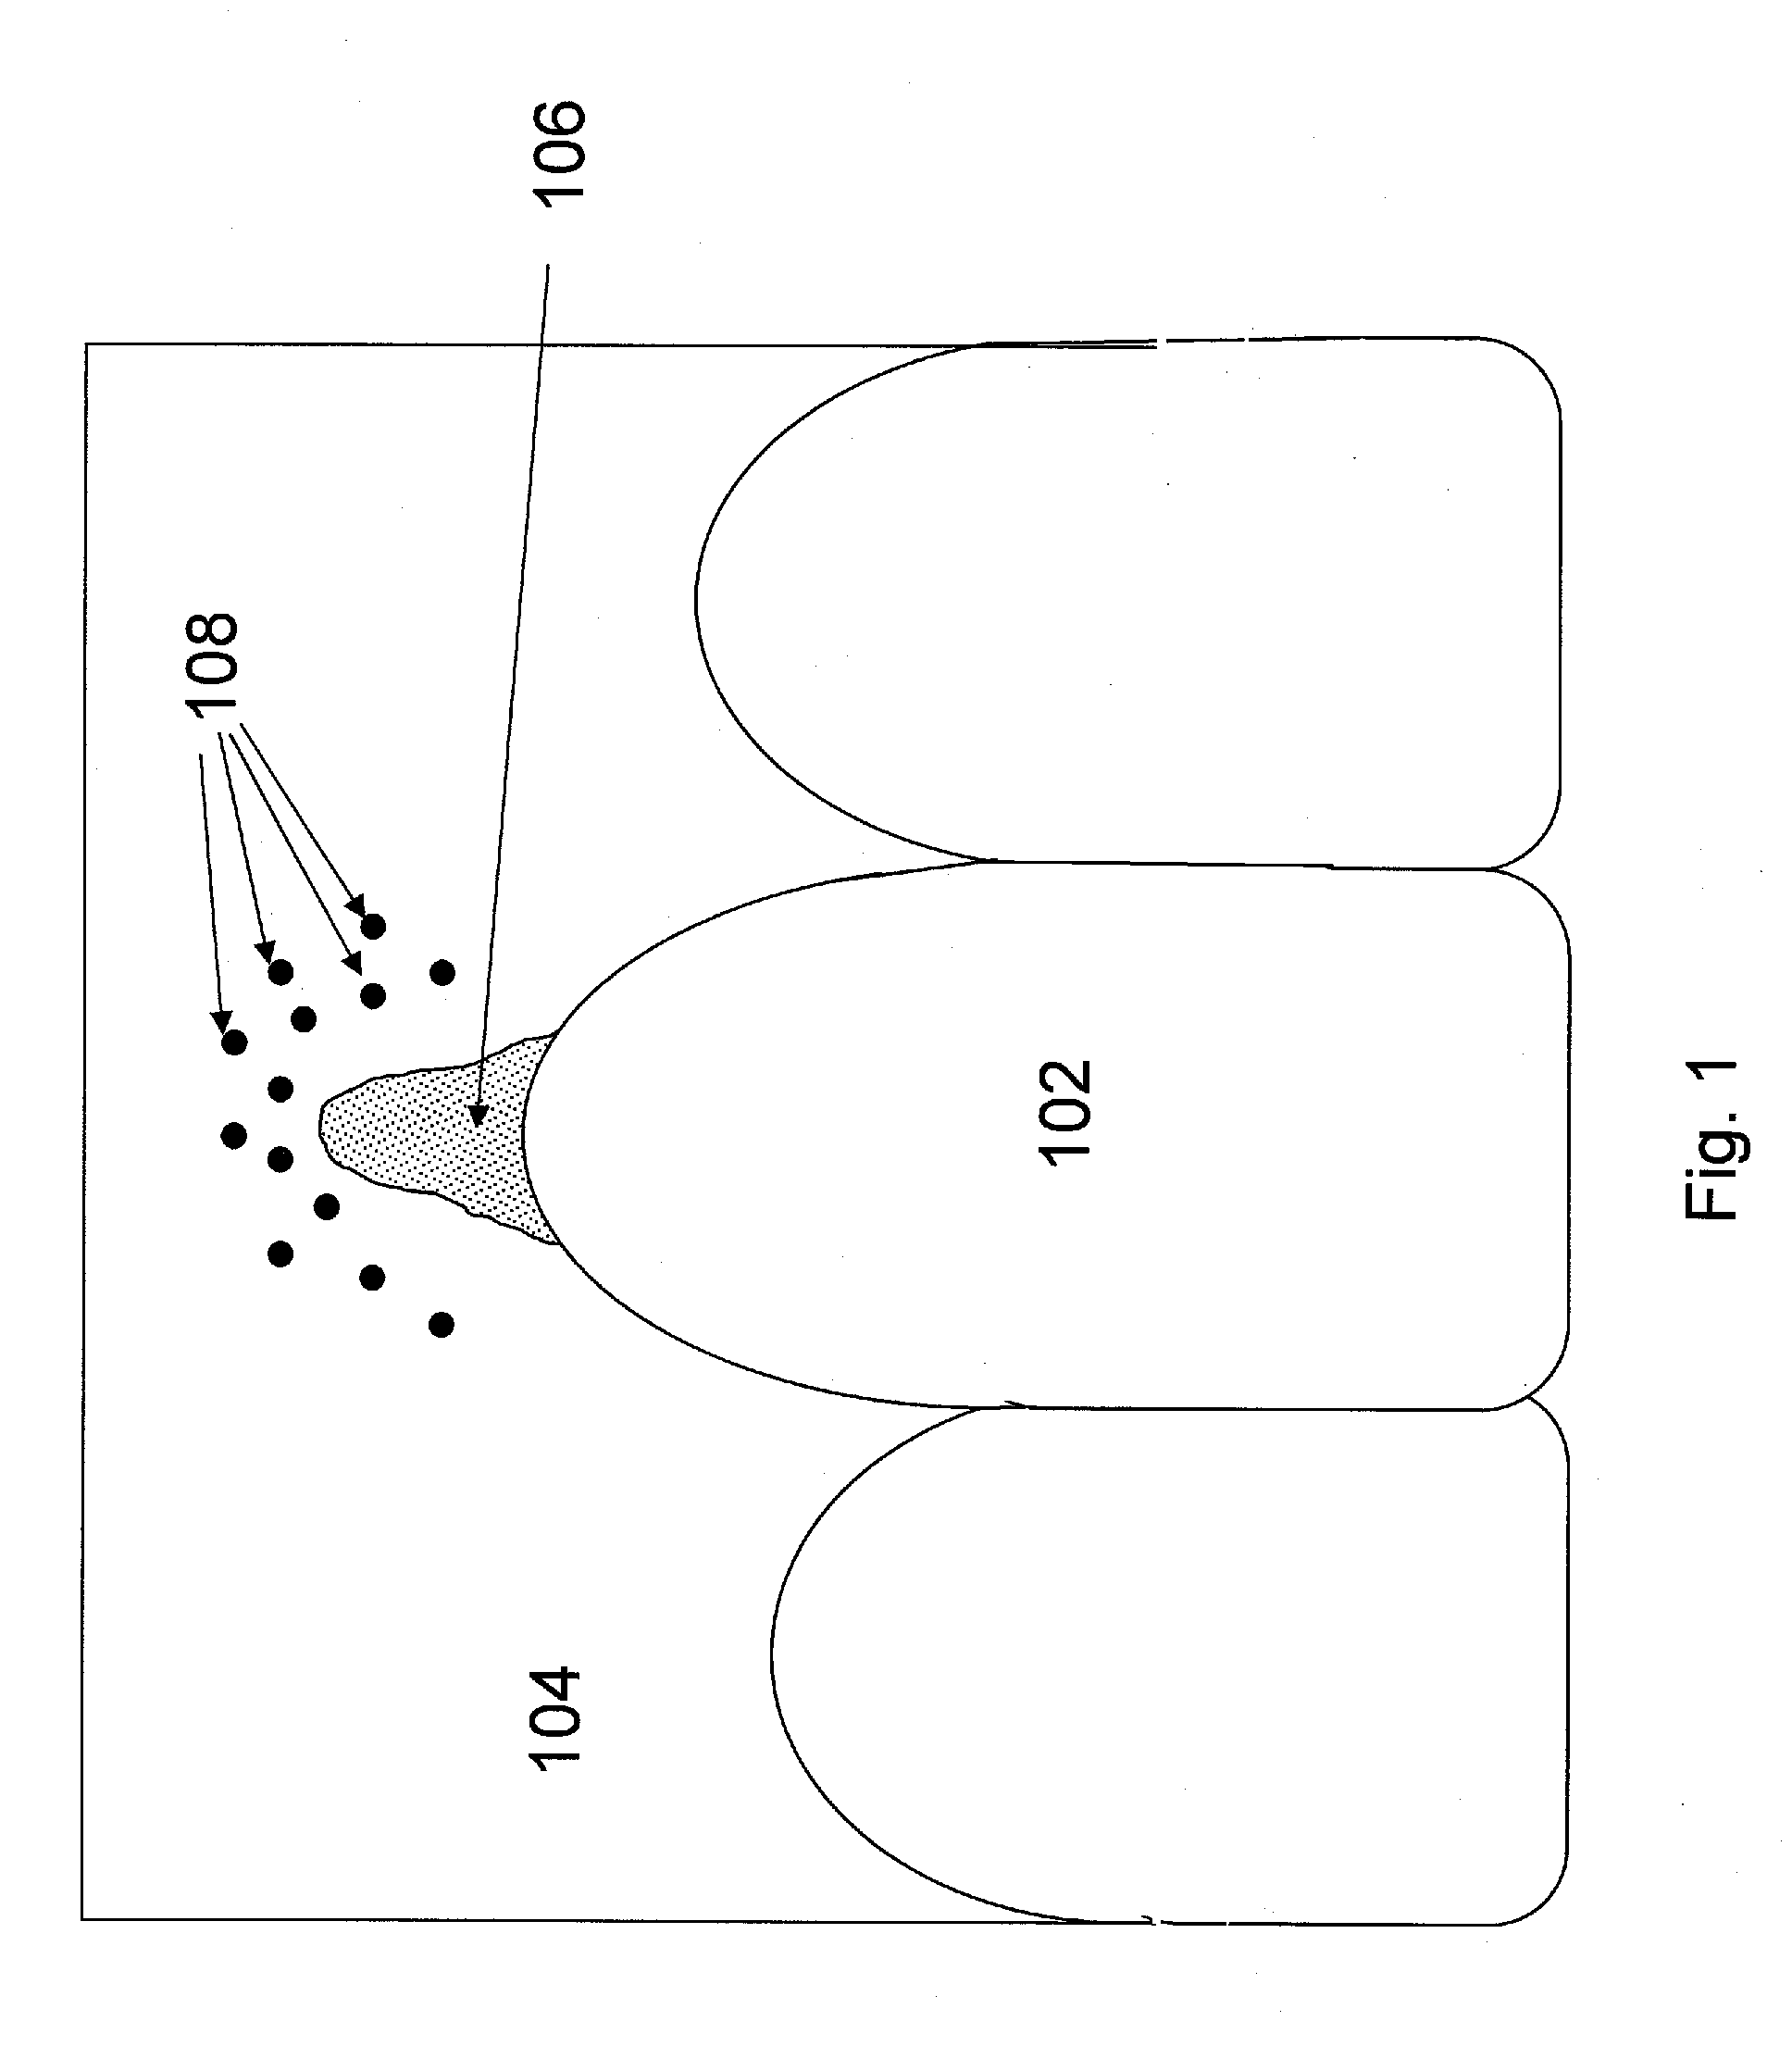 Method and Apparatus for Regeneration of Oral Cavity Tissues